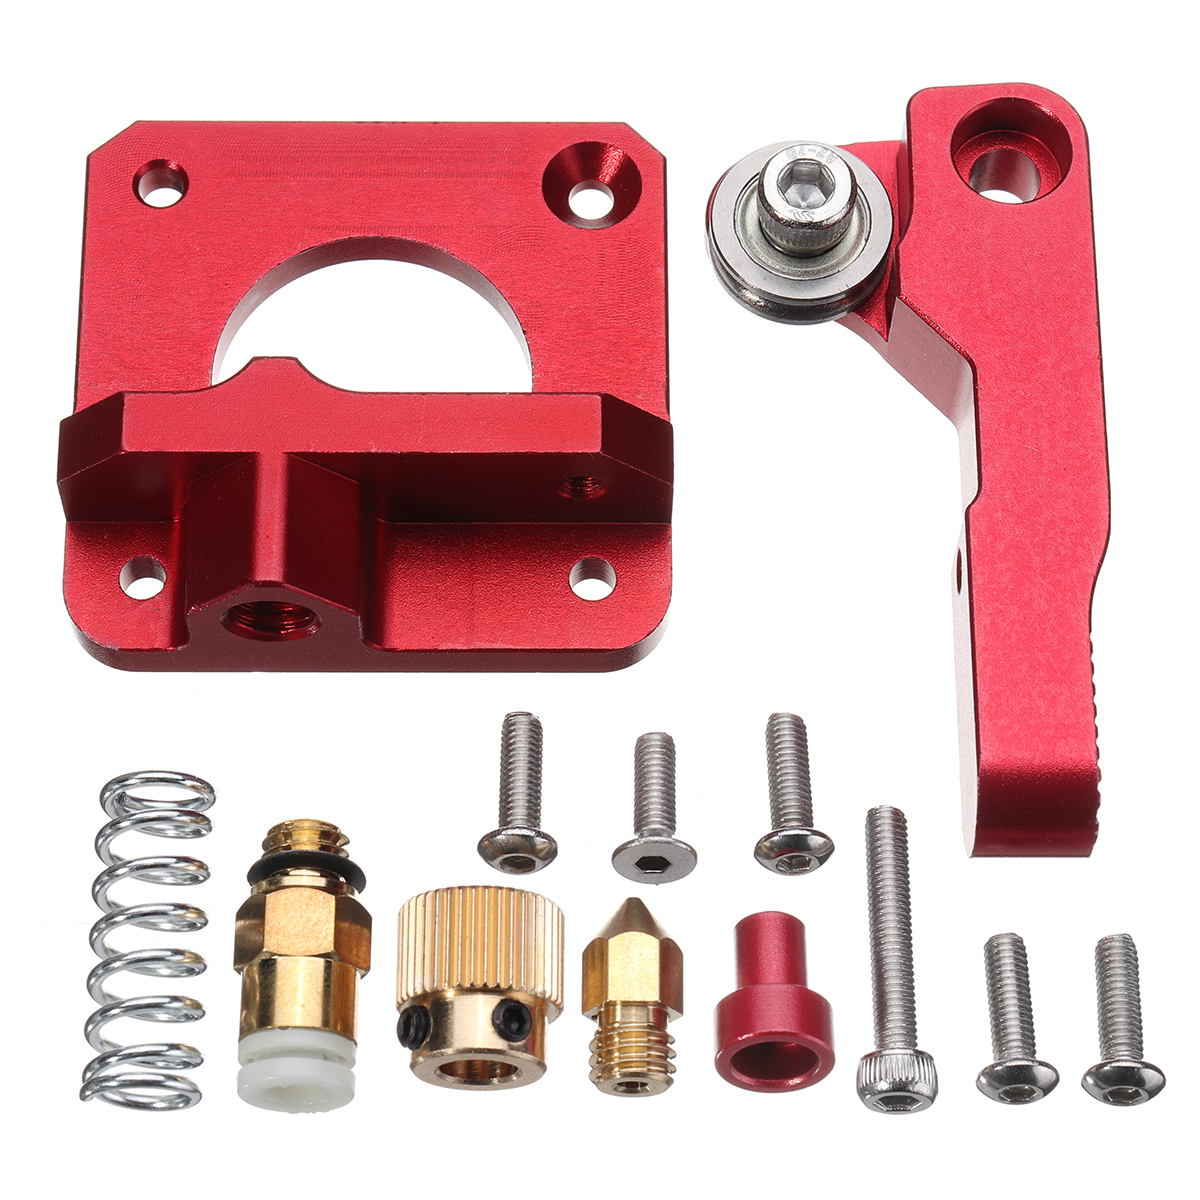 Upgrade Long-Distance Remote Metal Extruder Kit For Creality CR-10 3D Printer 21